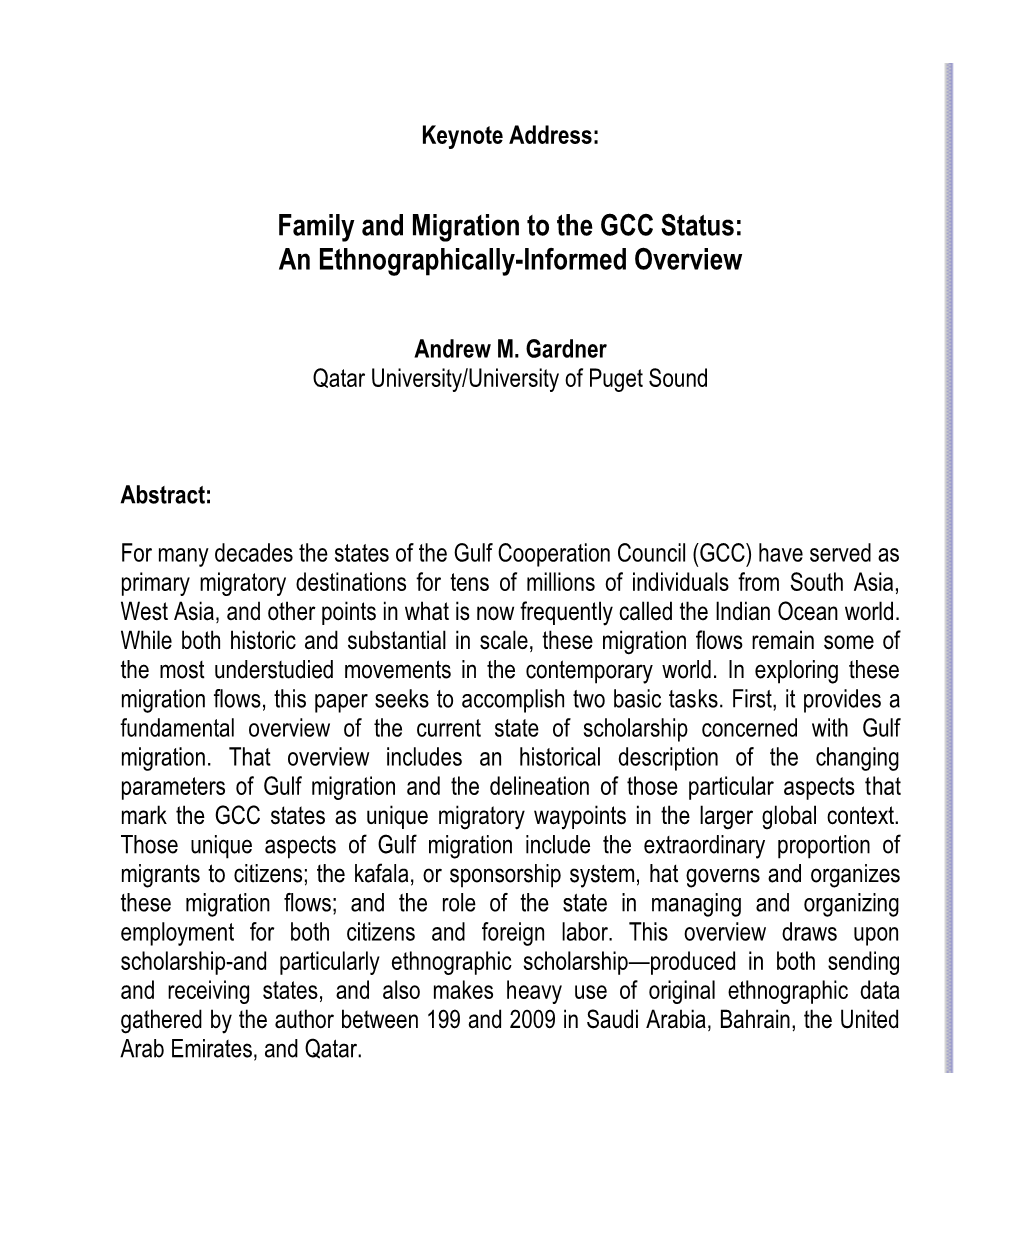 Family and Migration to the GCC Status: an Ethnographically-Informed Overview